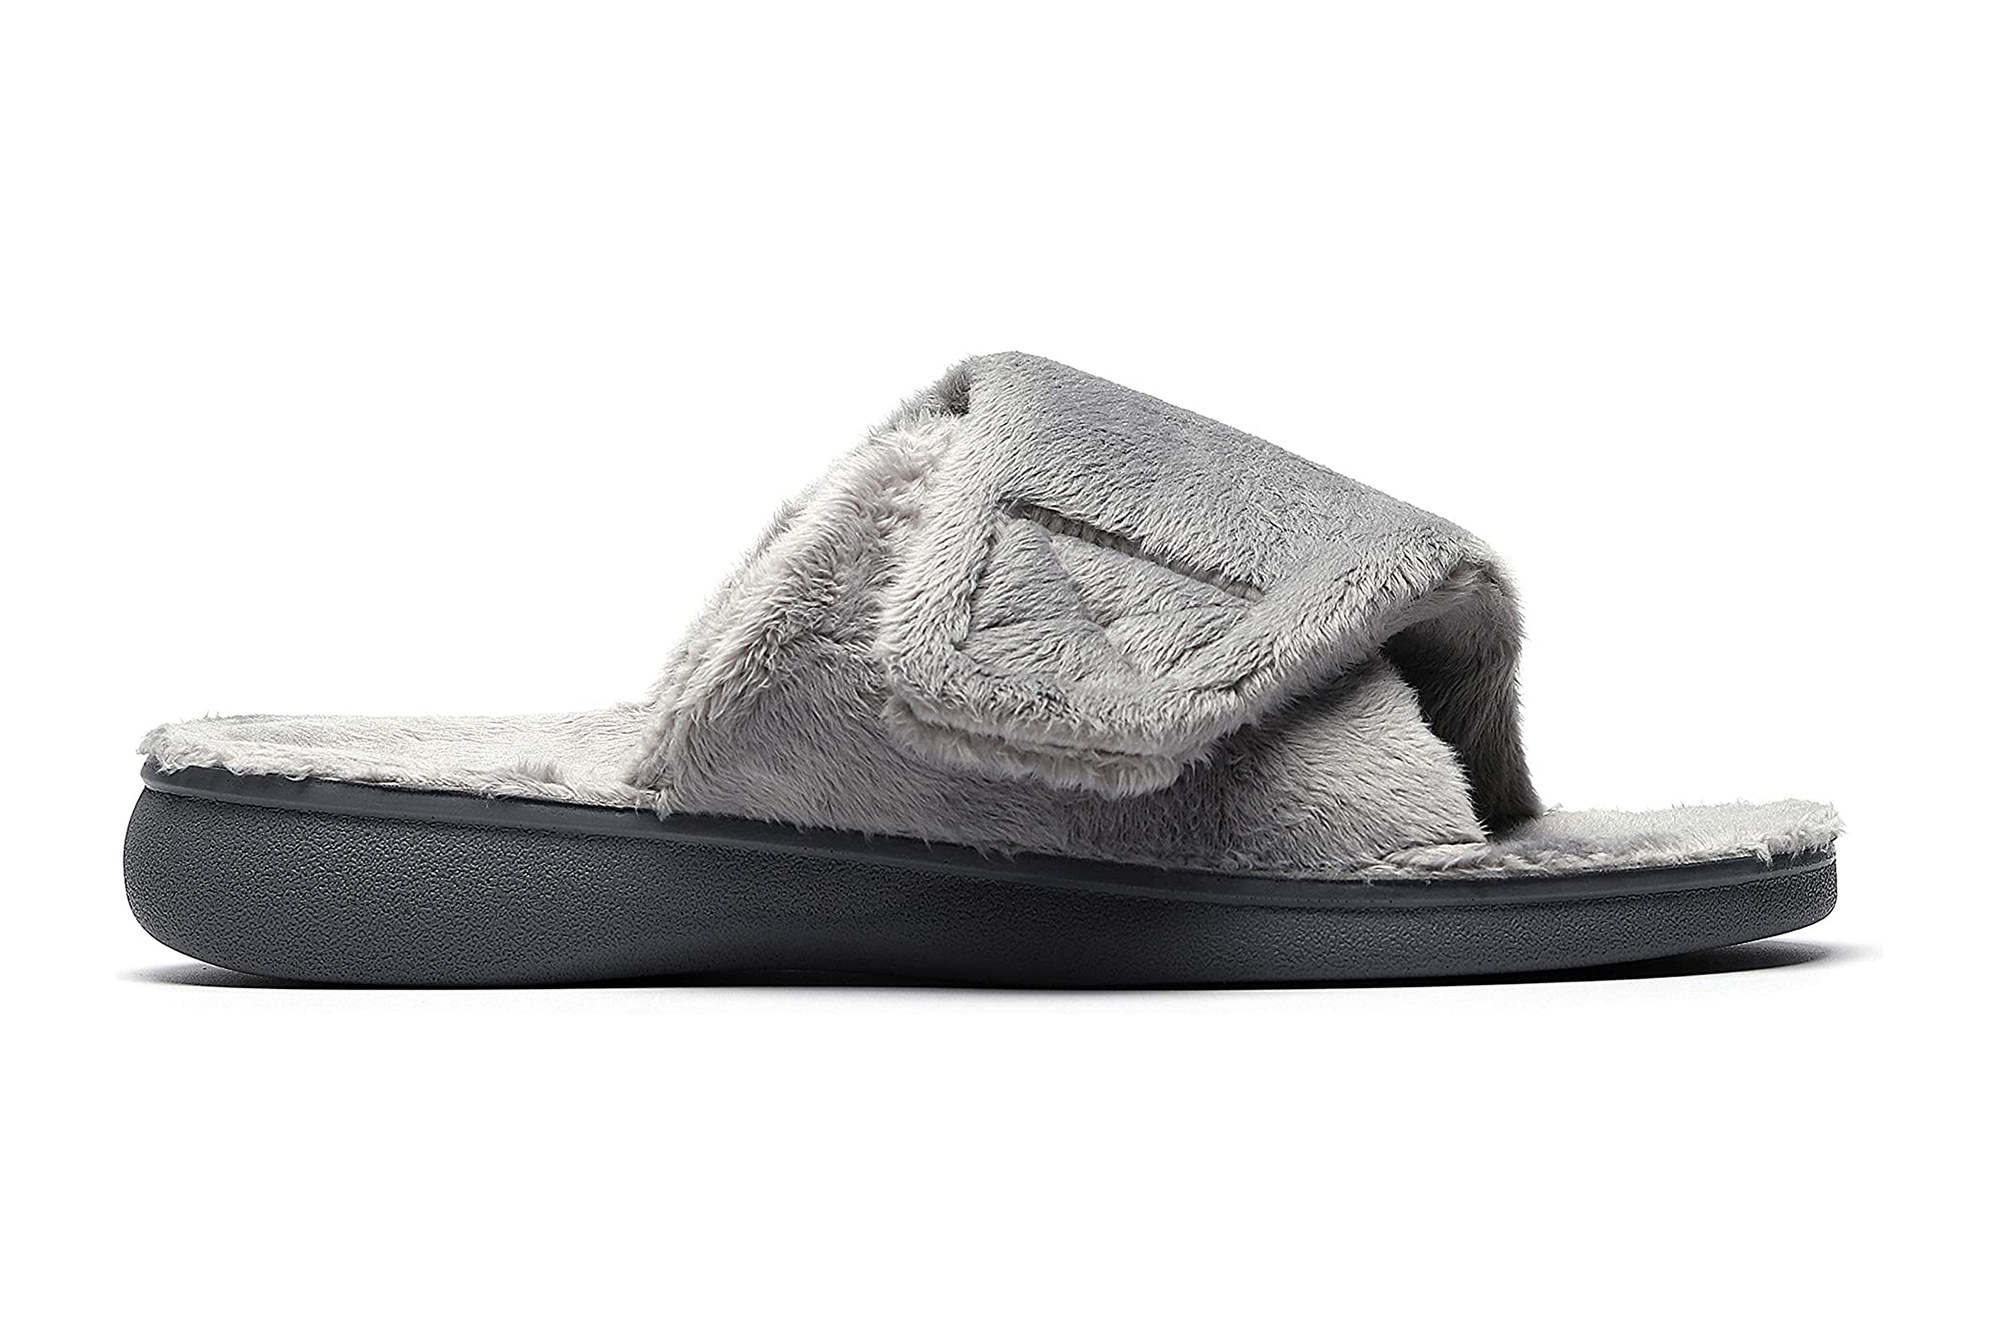 An image of Sollbeam fuzzy house slippers